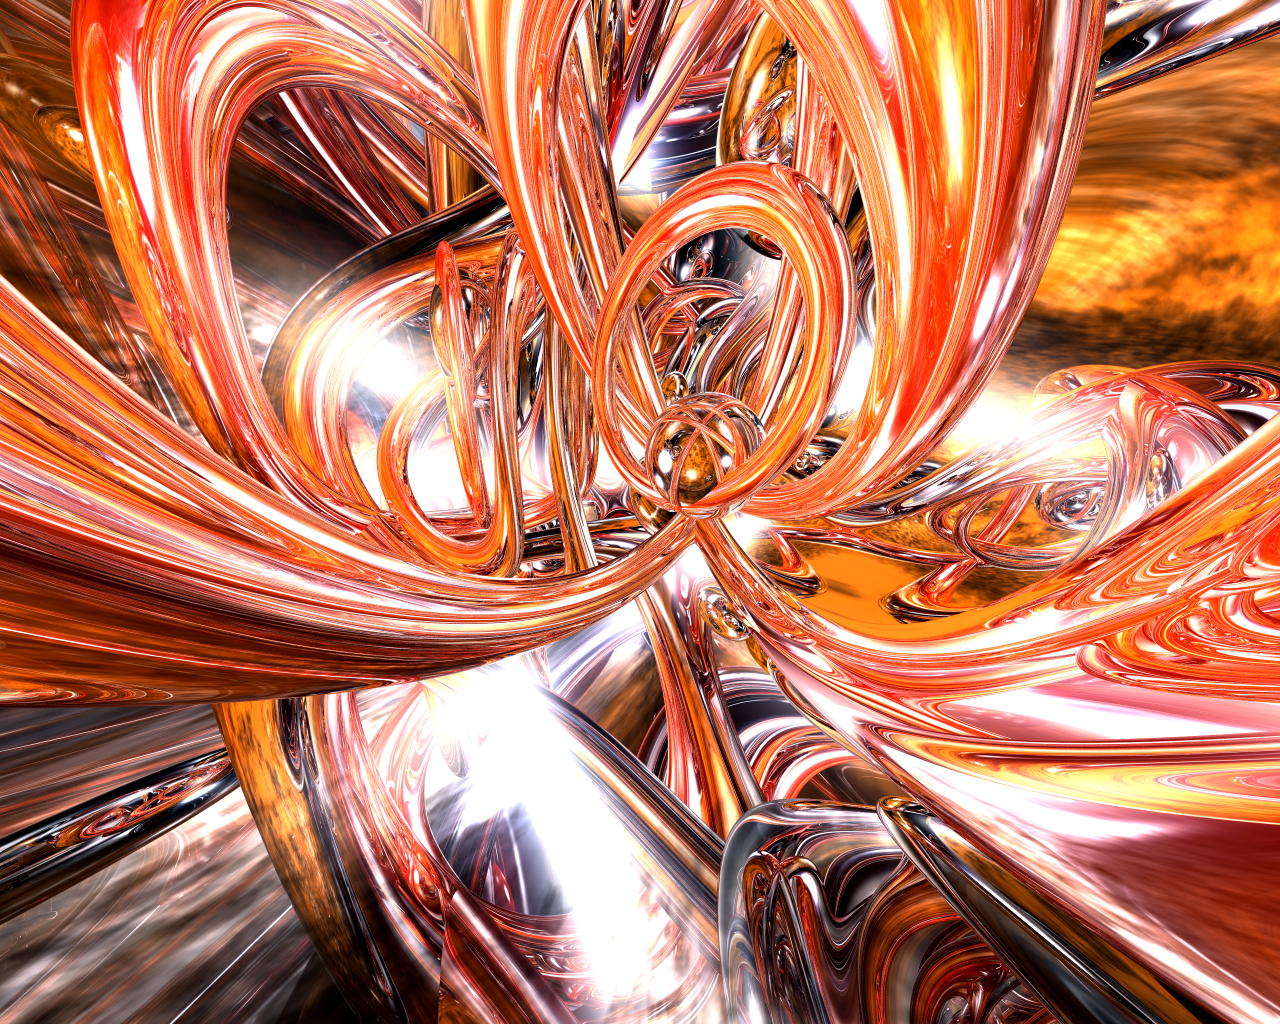 Download High quality Abstract wallpaper / 3d And Digital Art / 1280x1024